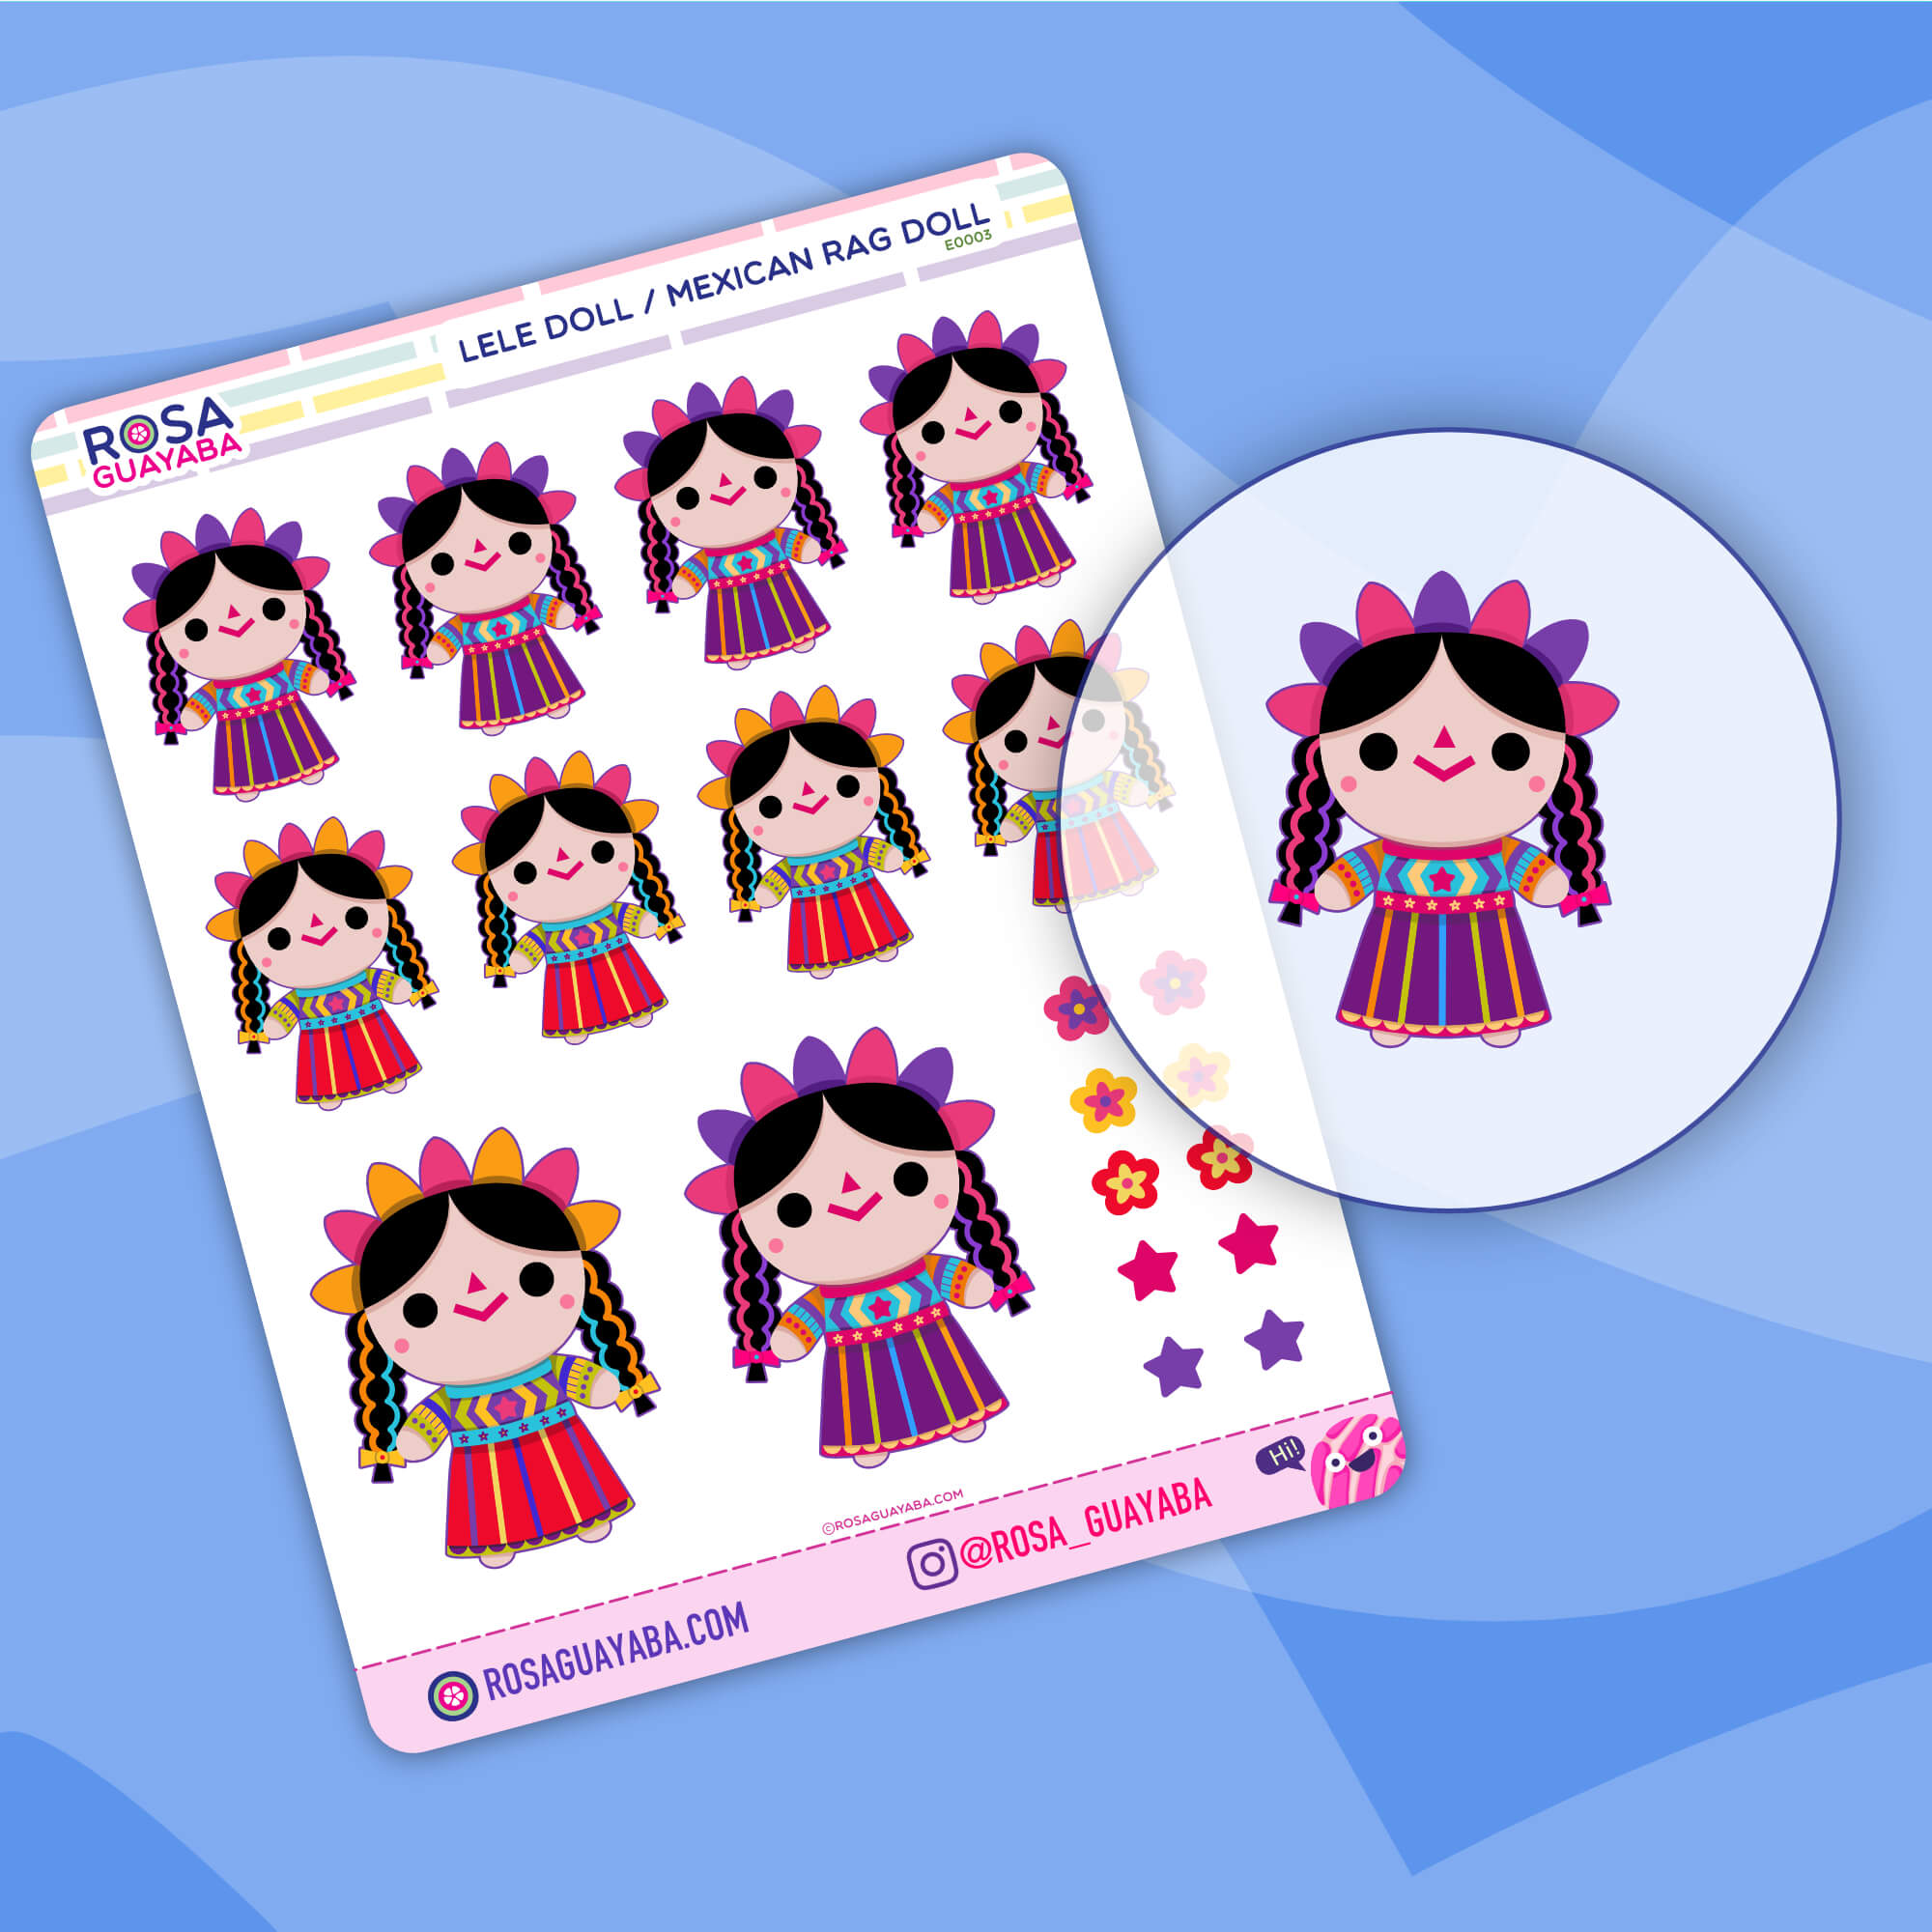 Lele Doll / Mexican Rag Doll Stickers